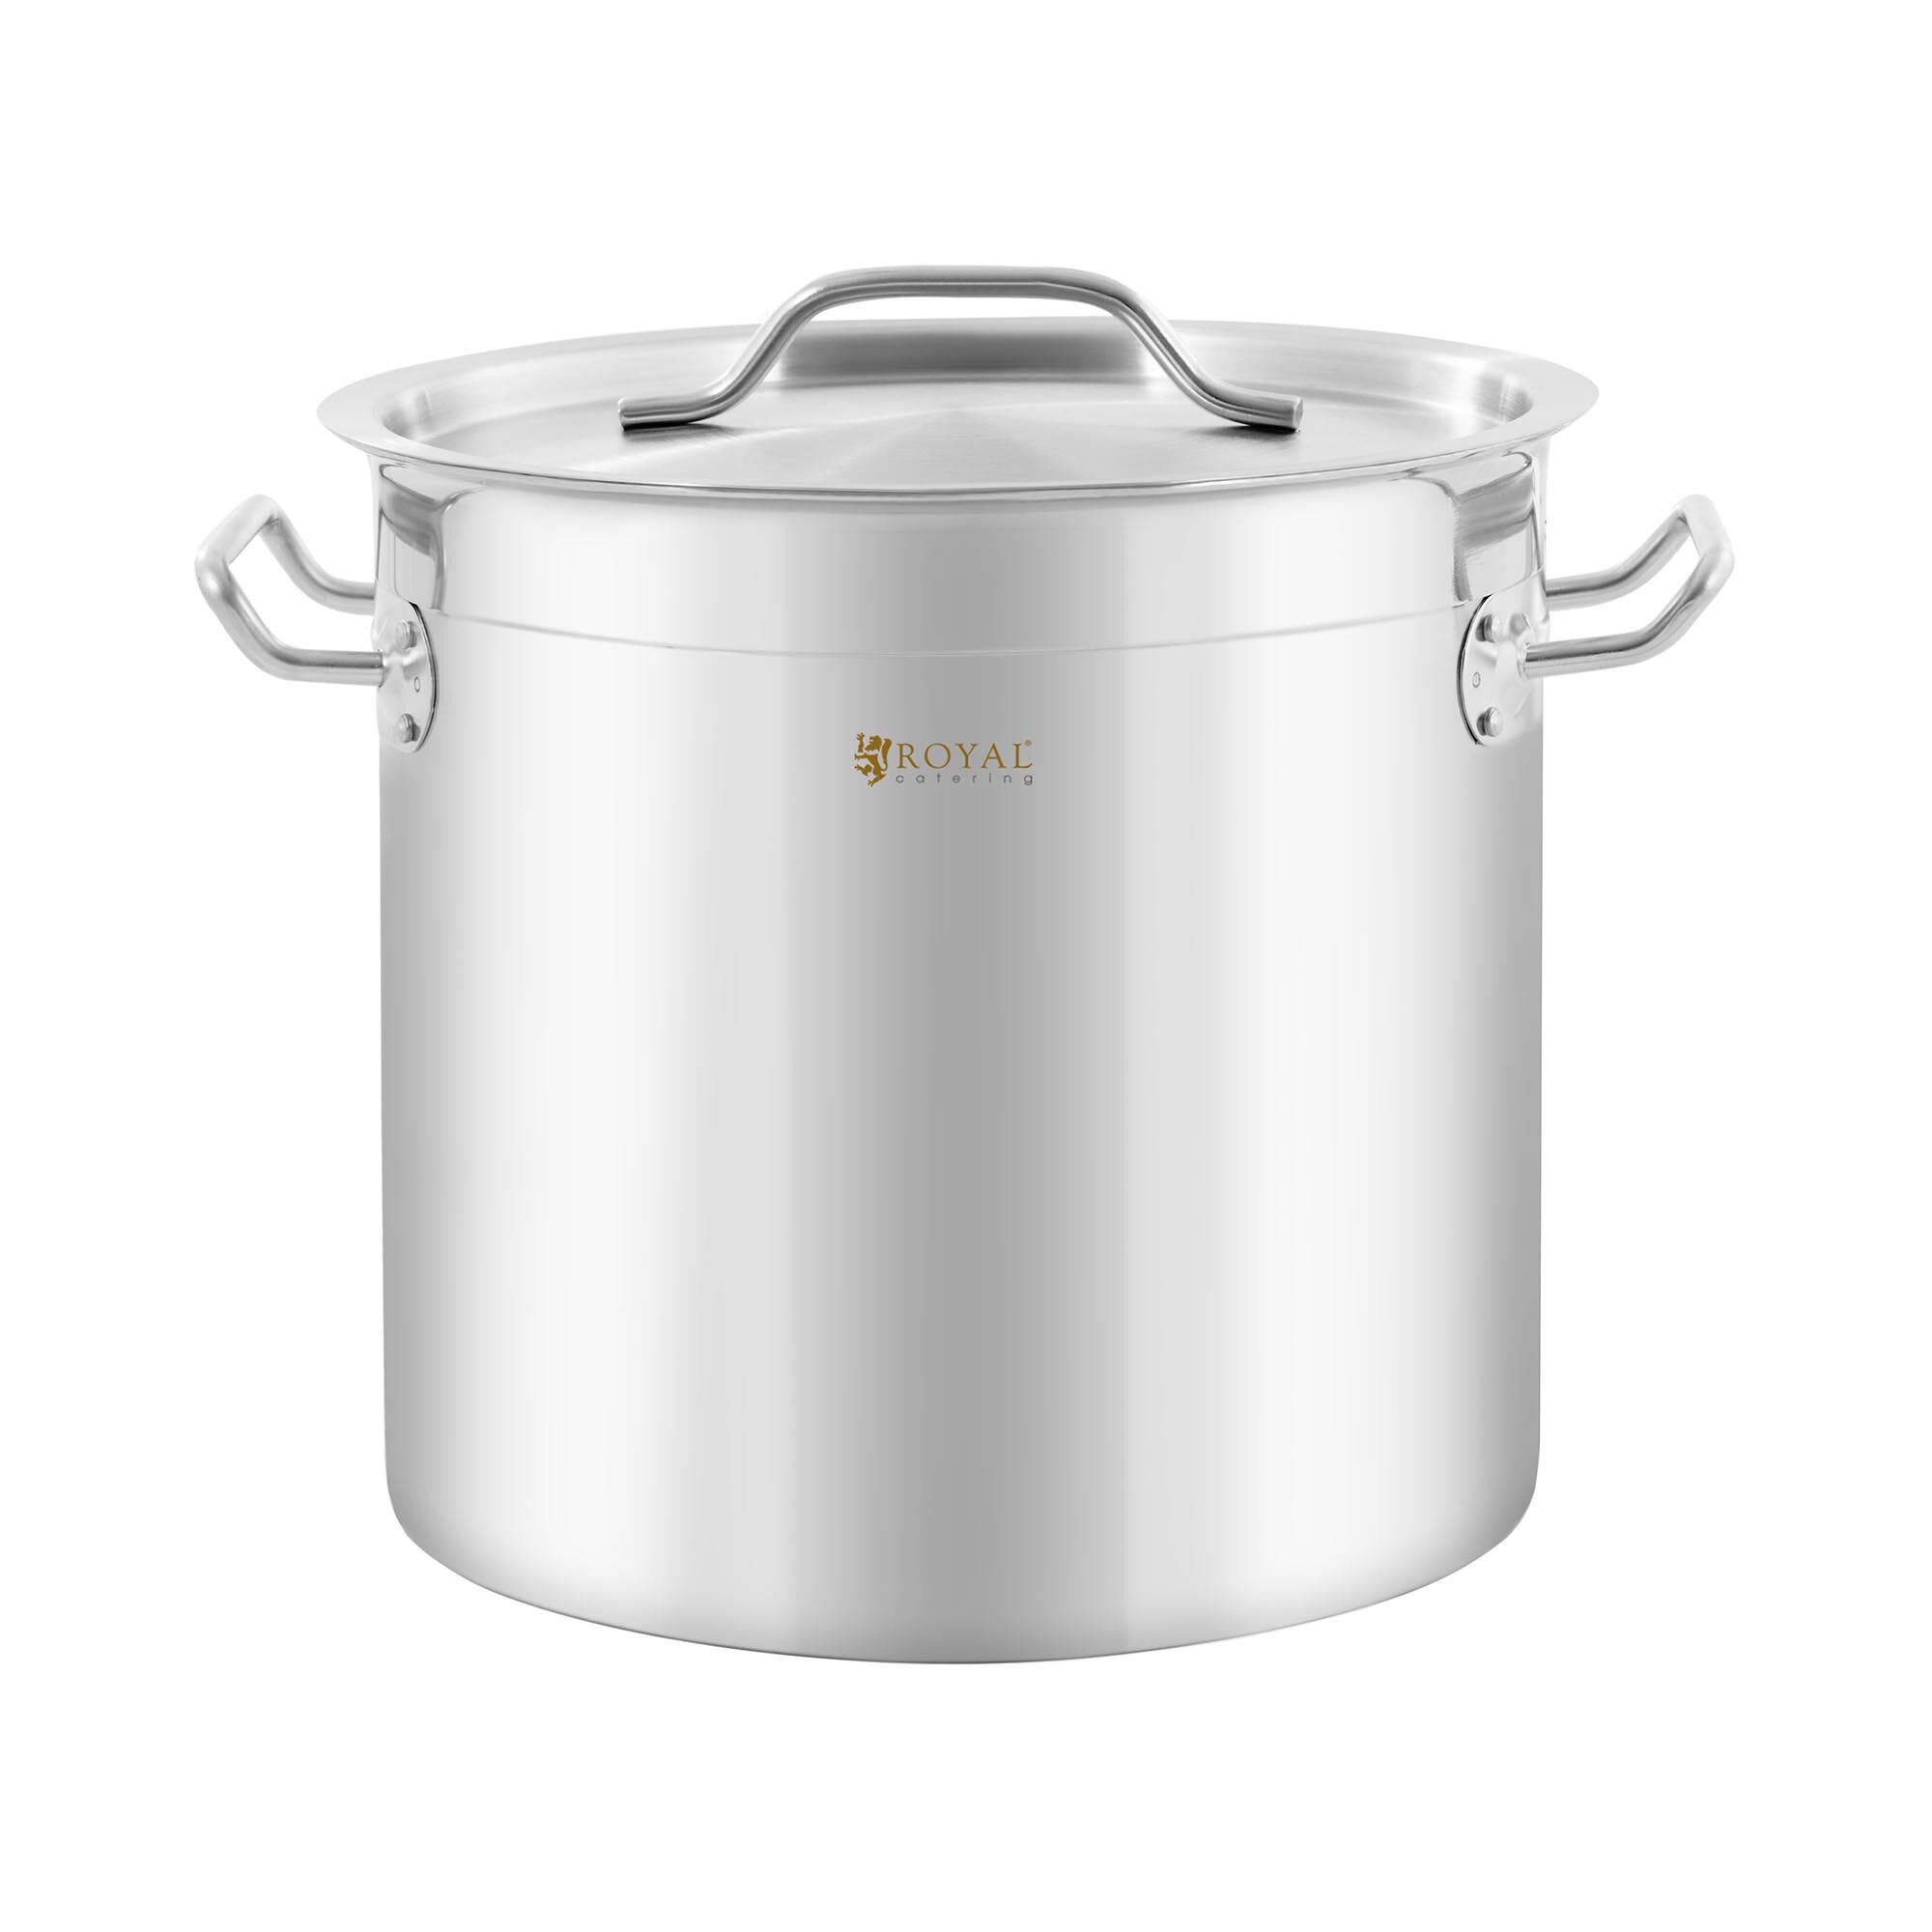 Royal Catering Induction Cooking Pot - 12 L - Royal Catering - 250 mm